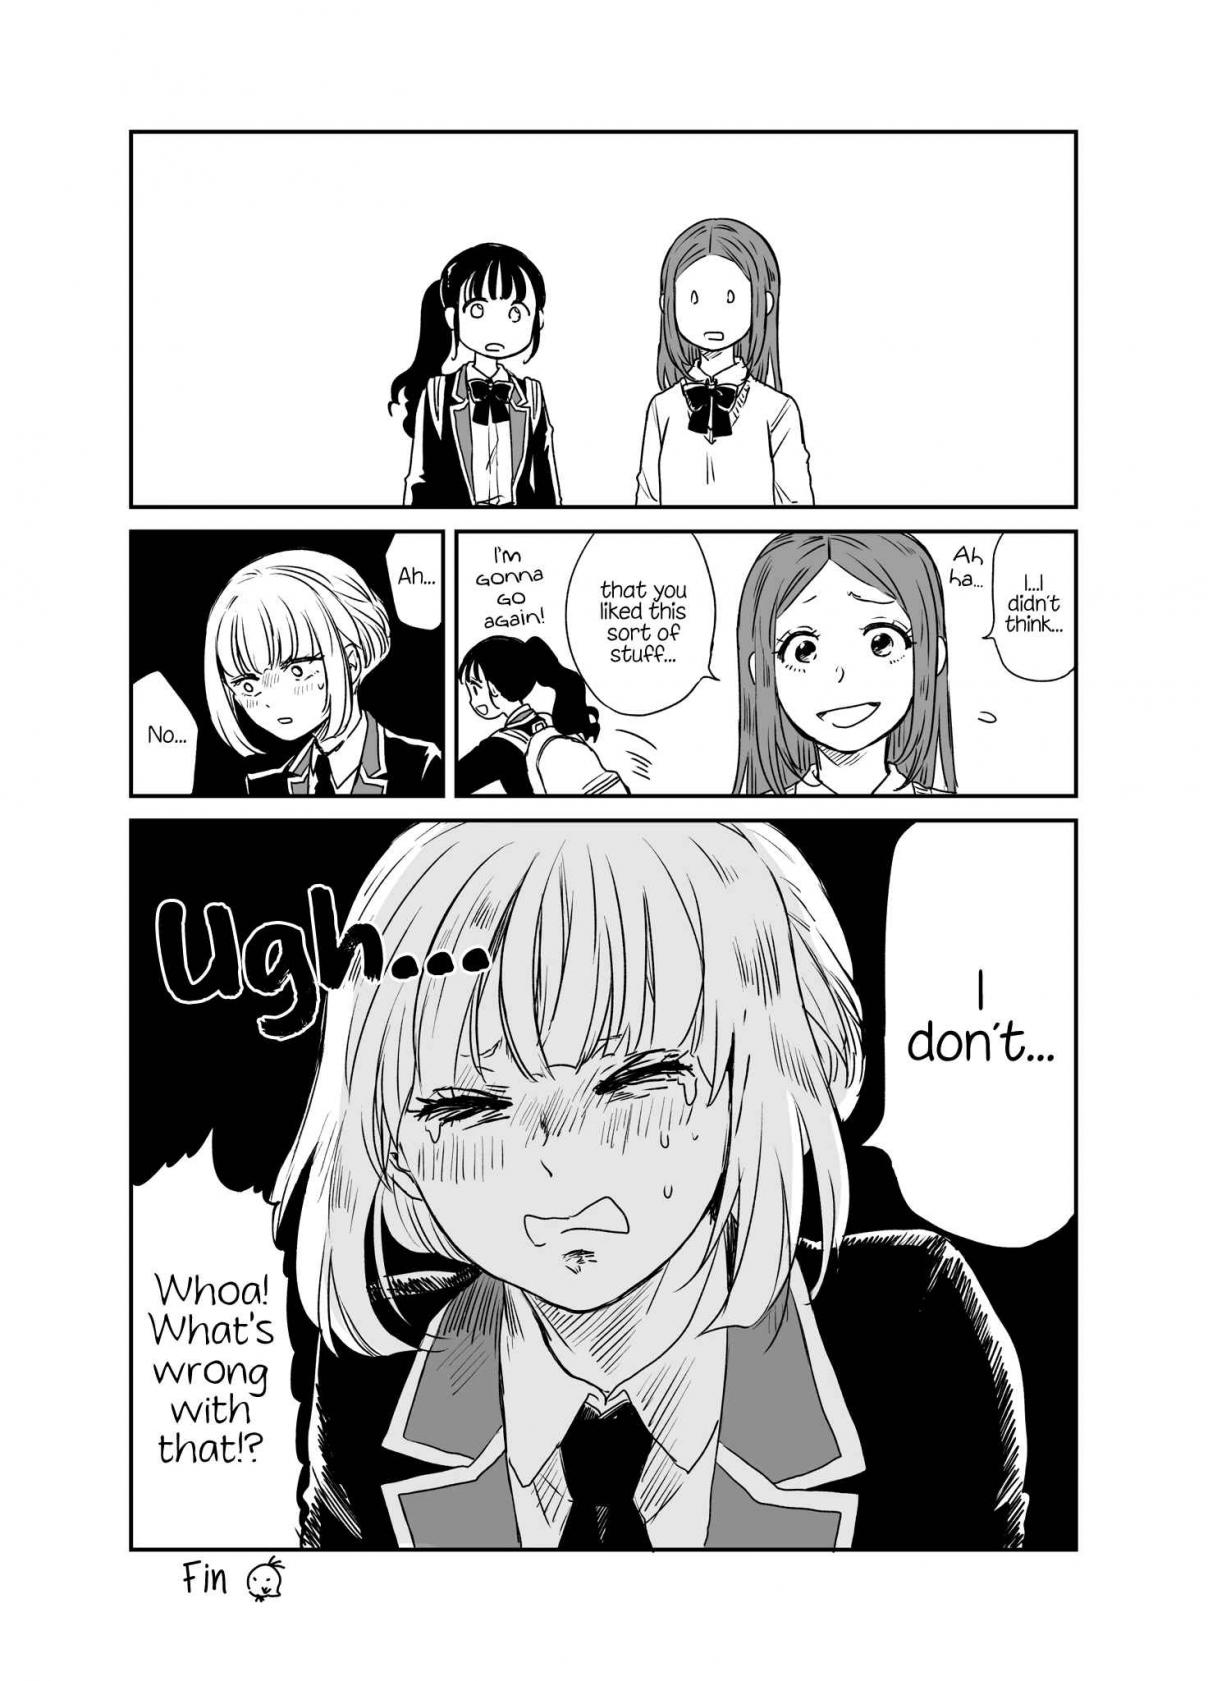 She's an Android Ch. 3